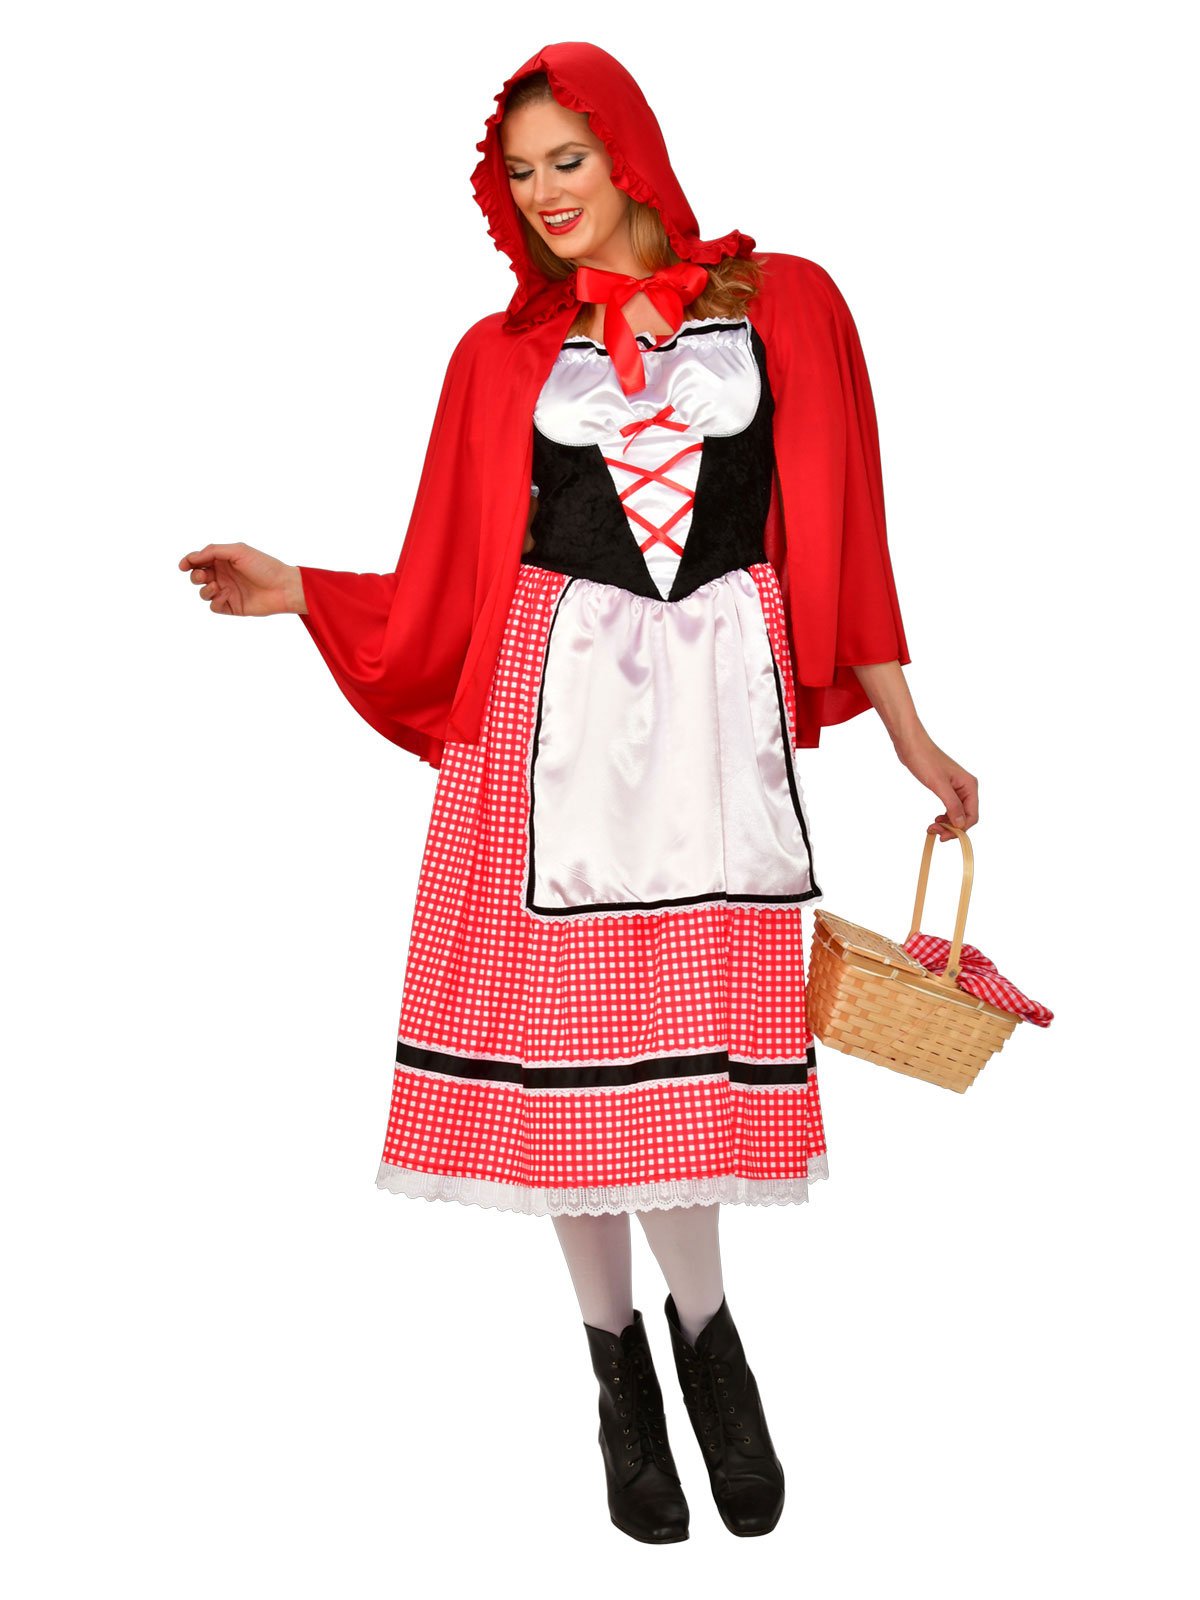 Costume Adult Red Riding Hood Small